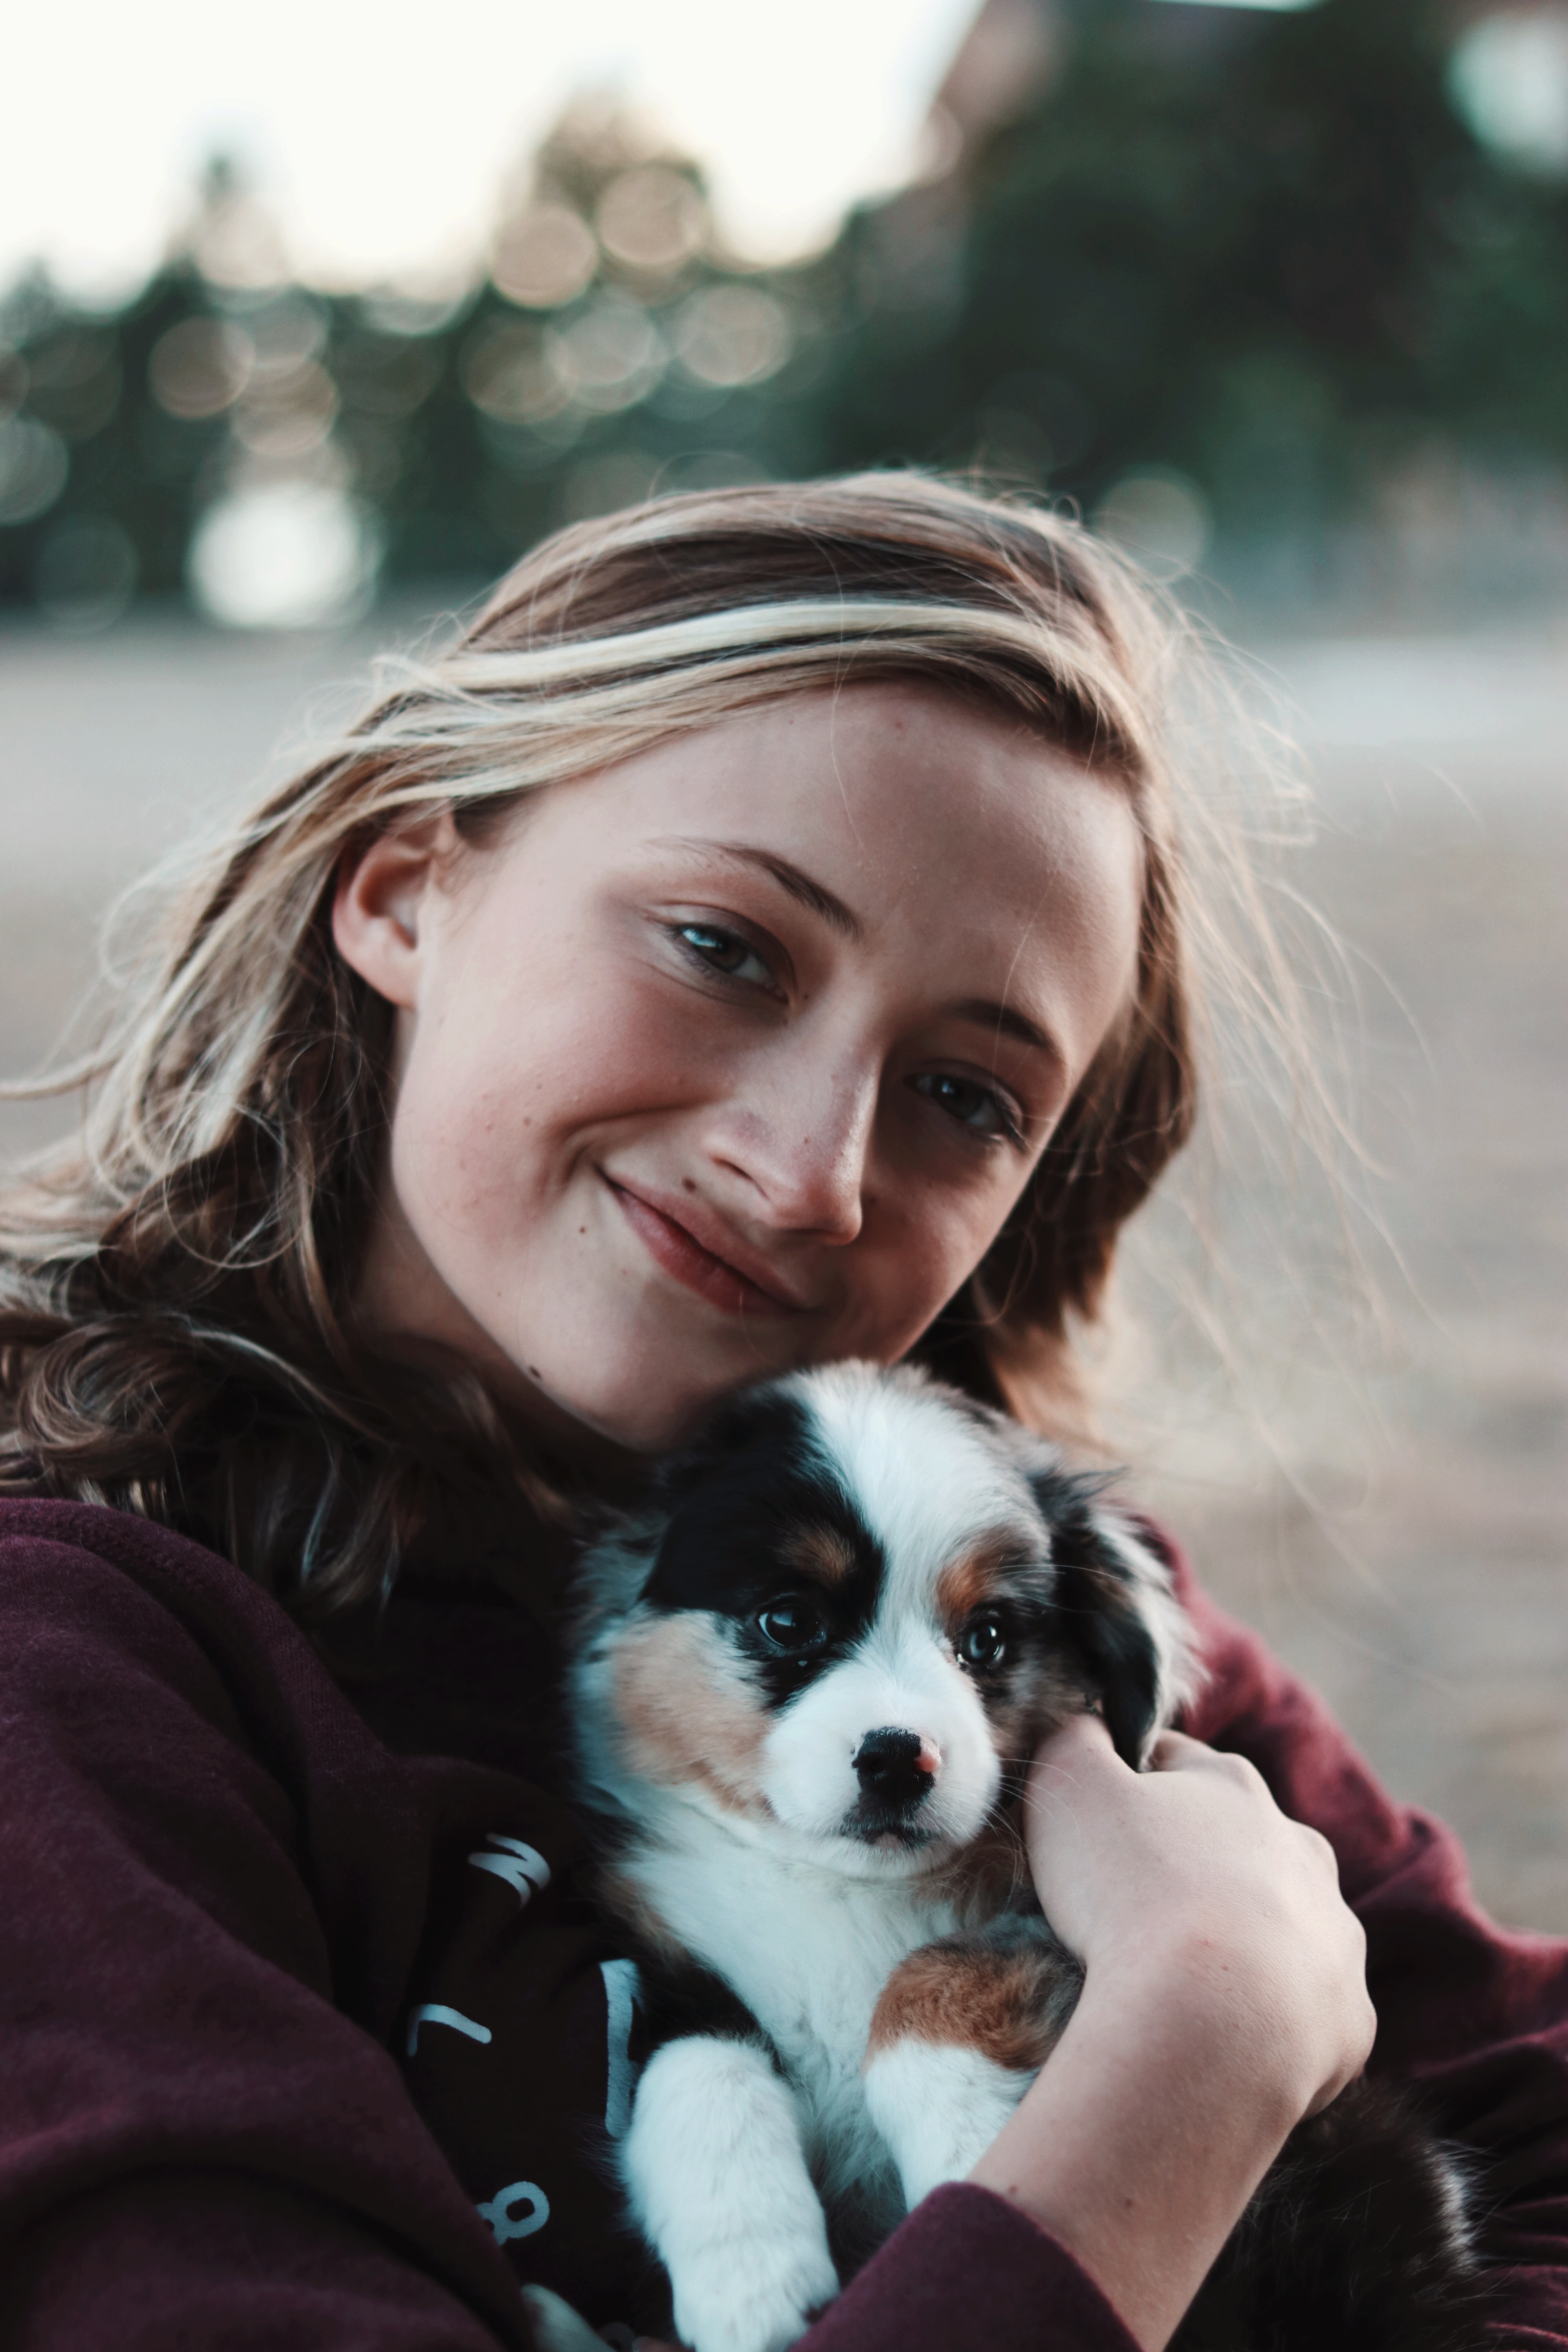 The image in the section that begins with the text “like a best friend” is a picture of a pretty young lady with long, flowing light brownish red hair with light blonde hair streaks, perhaps in her late 20s to early 30s, holding what appears to be an Australian sheepdog very young puppy to her chest with a warm, loving smile with her head tilted to hug the puppy. 